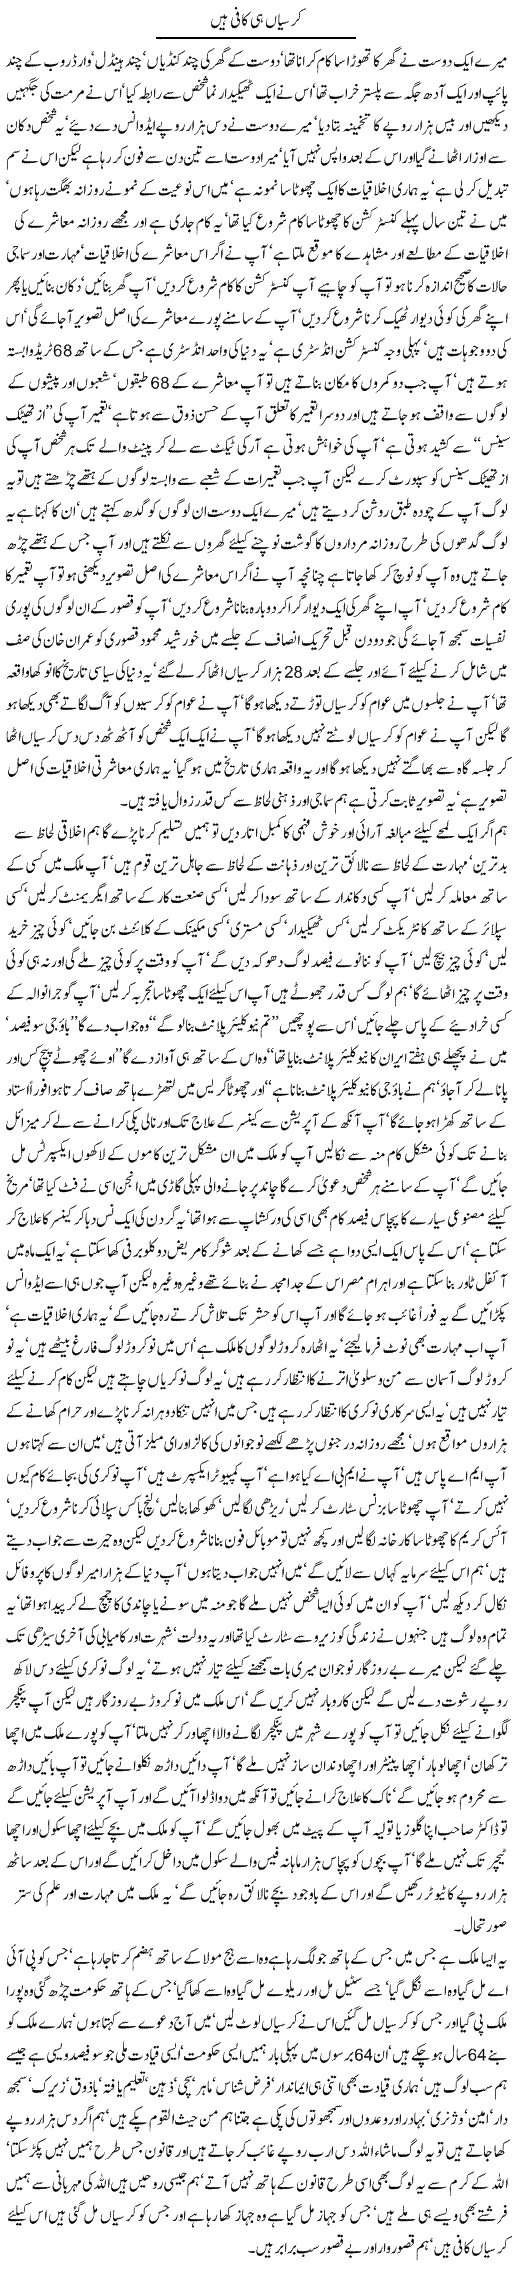 Chairs Looting Express Column Javed Chaudhry 22 December 2011